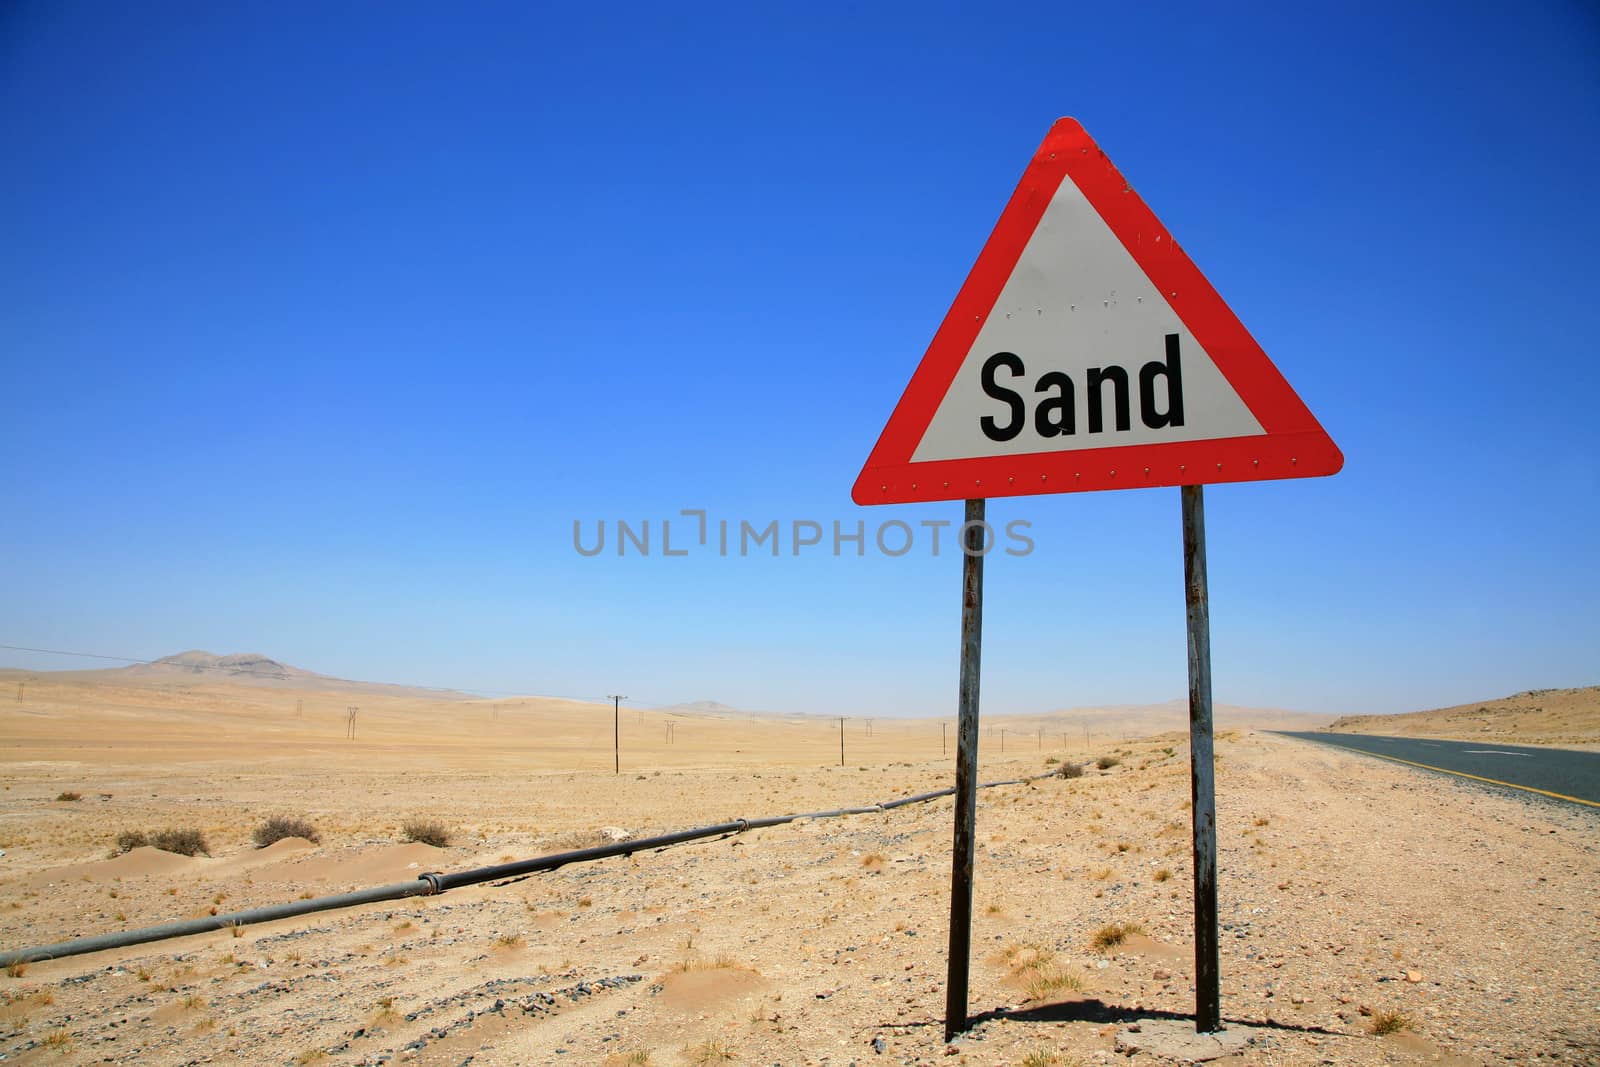 Sand Danger road sign in Namibia by watchtheworld